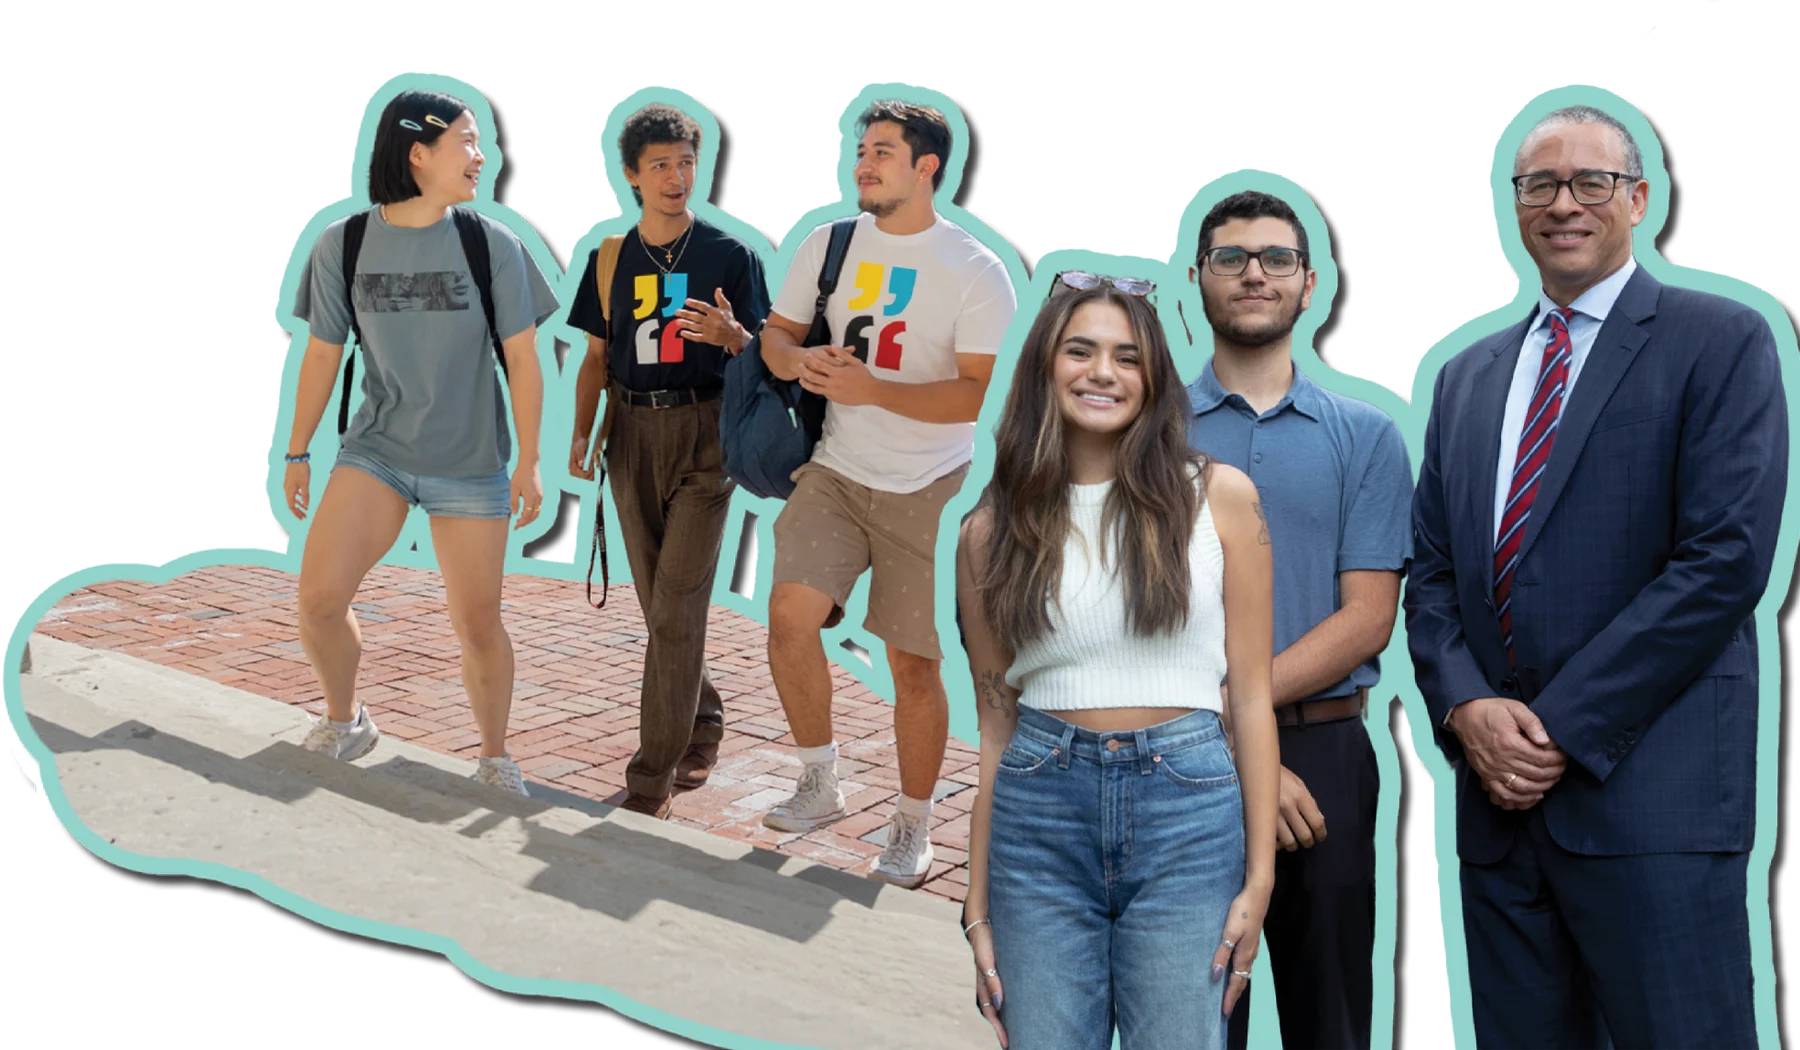 Stylized photo collage of civically engaged young people